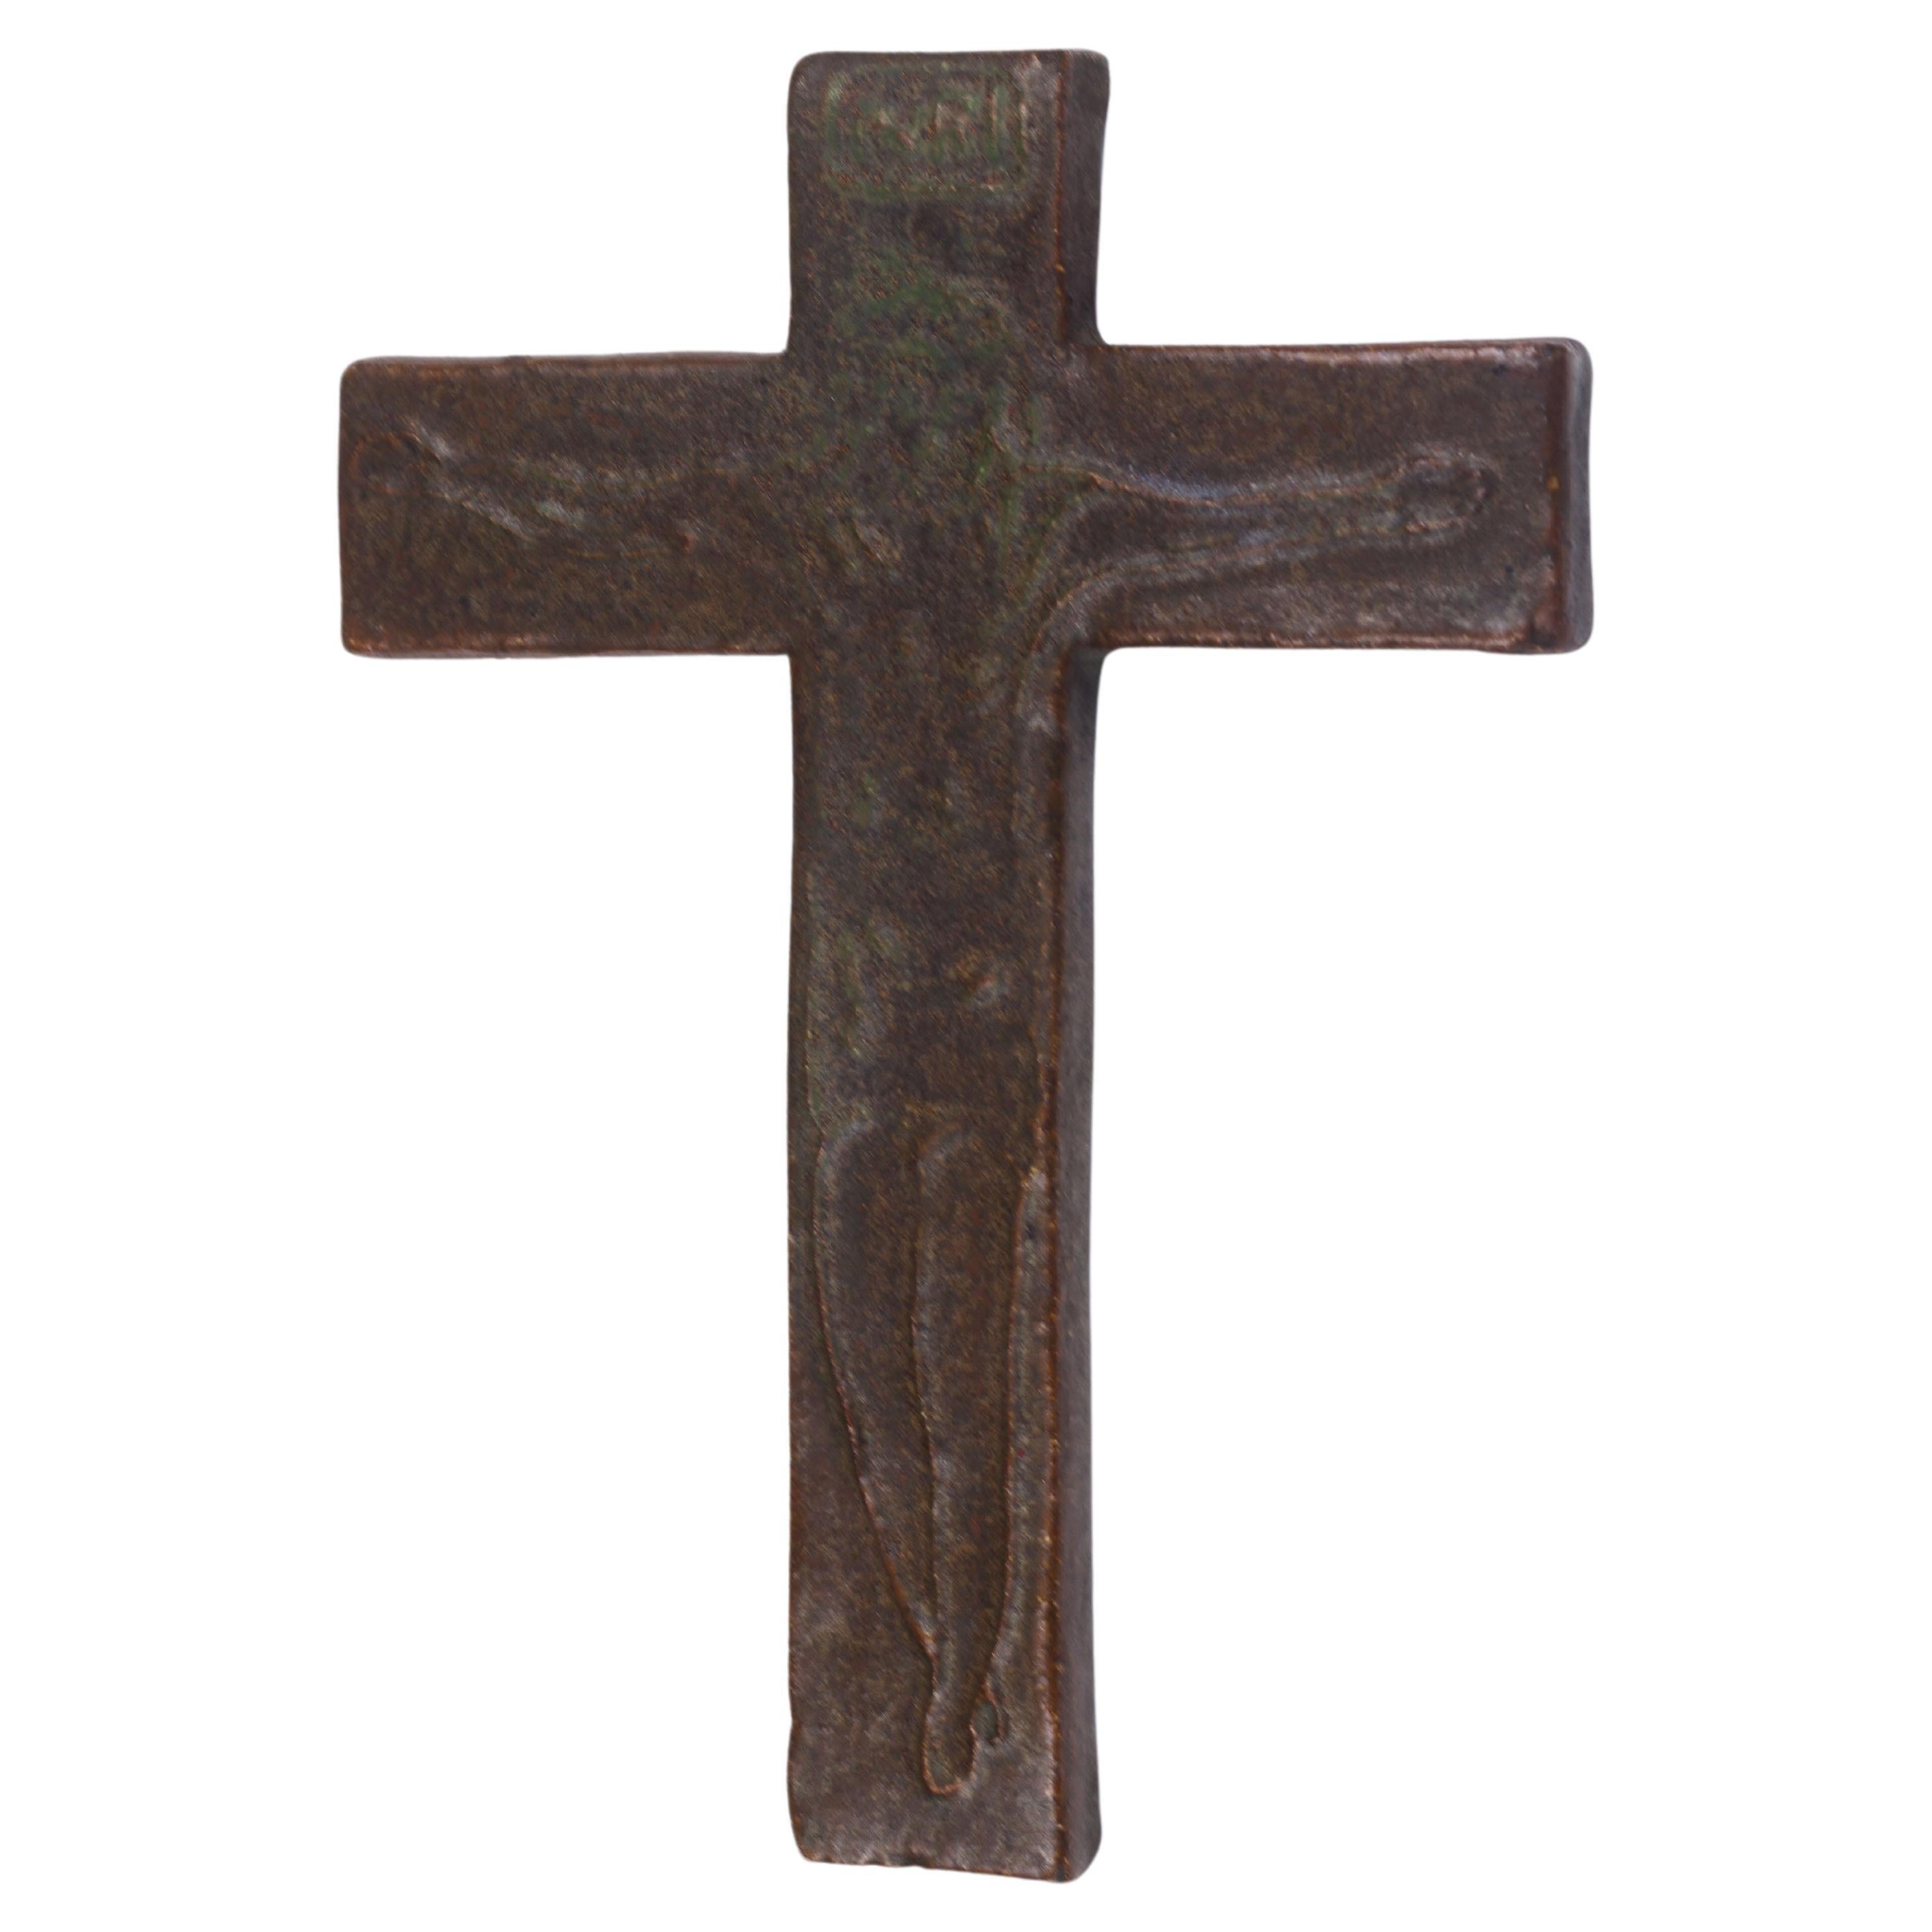 Midcentury European Brown and Green Ceramic Cross Otherworldly Christ Figure For Sale